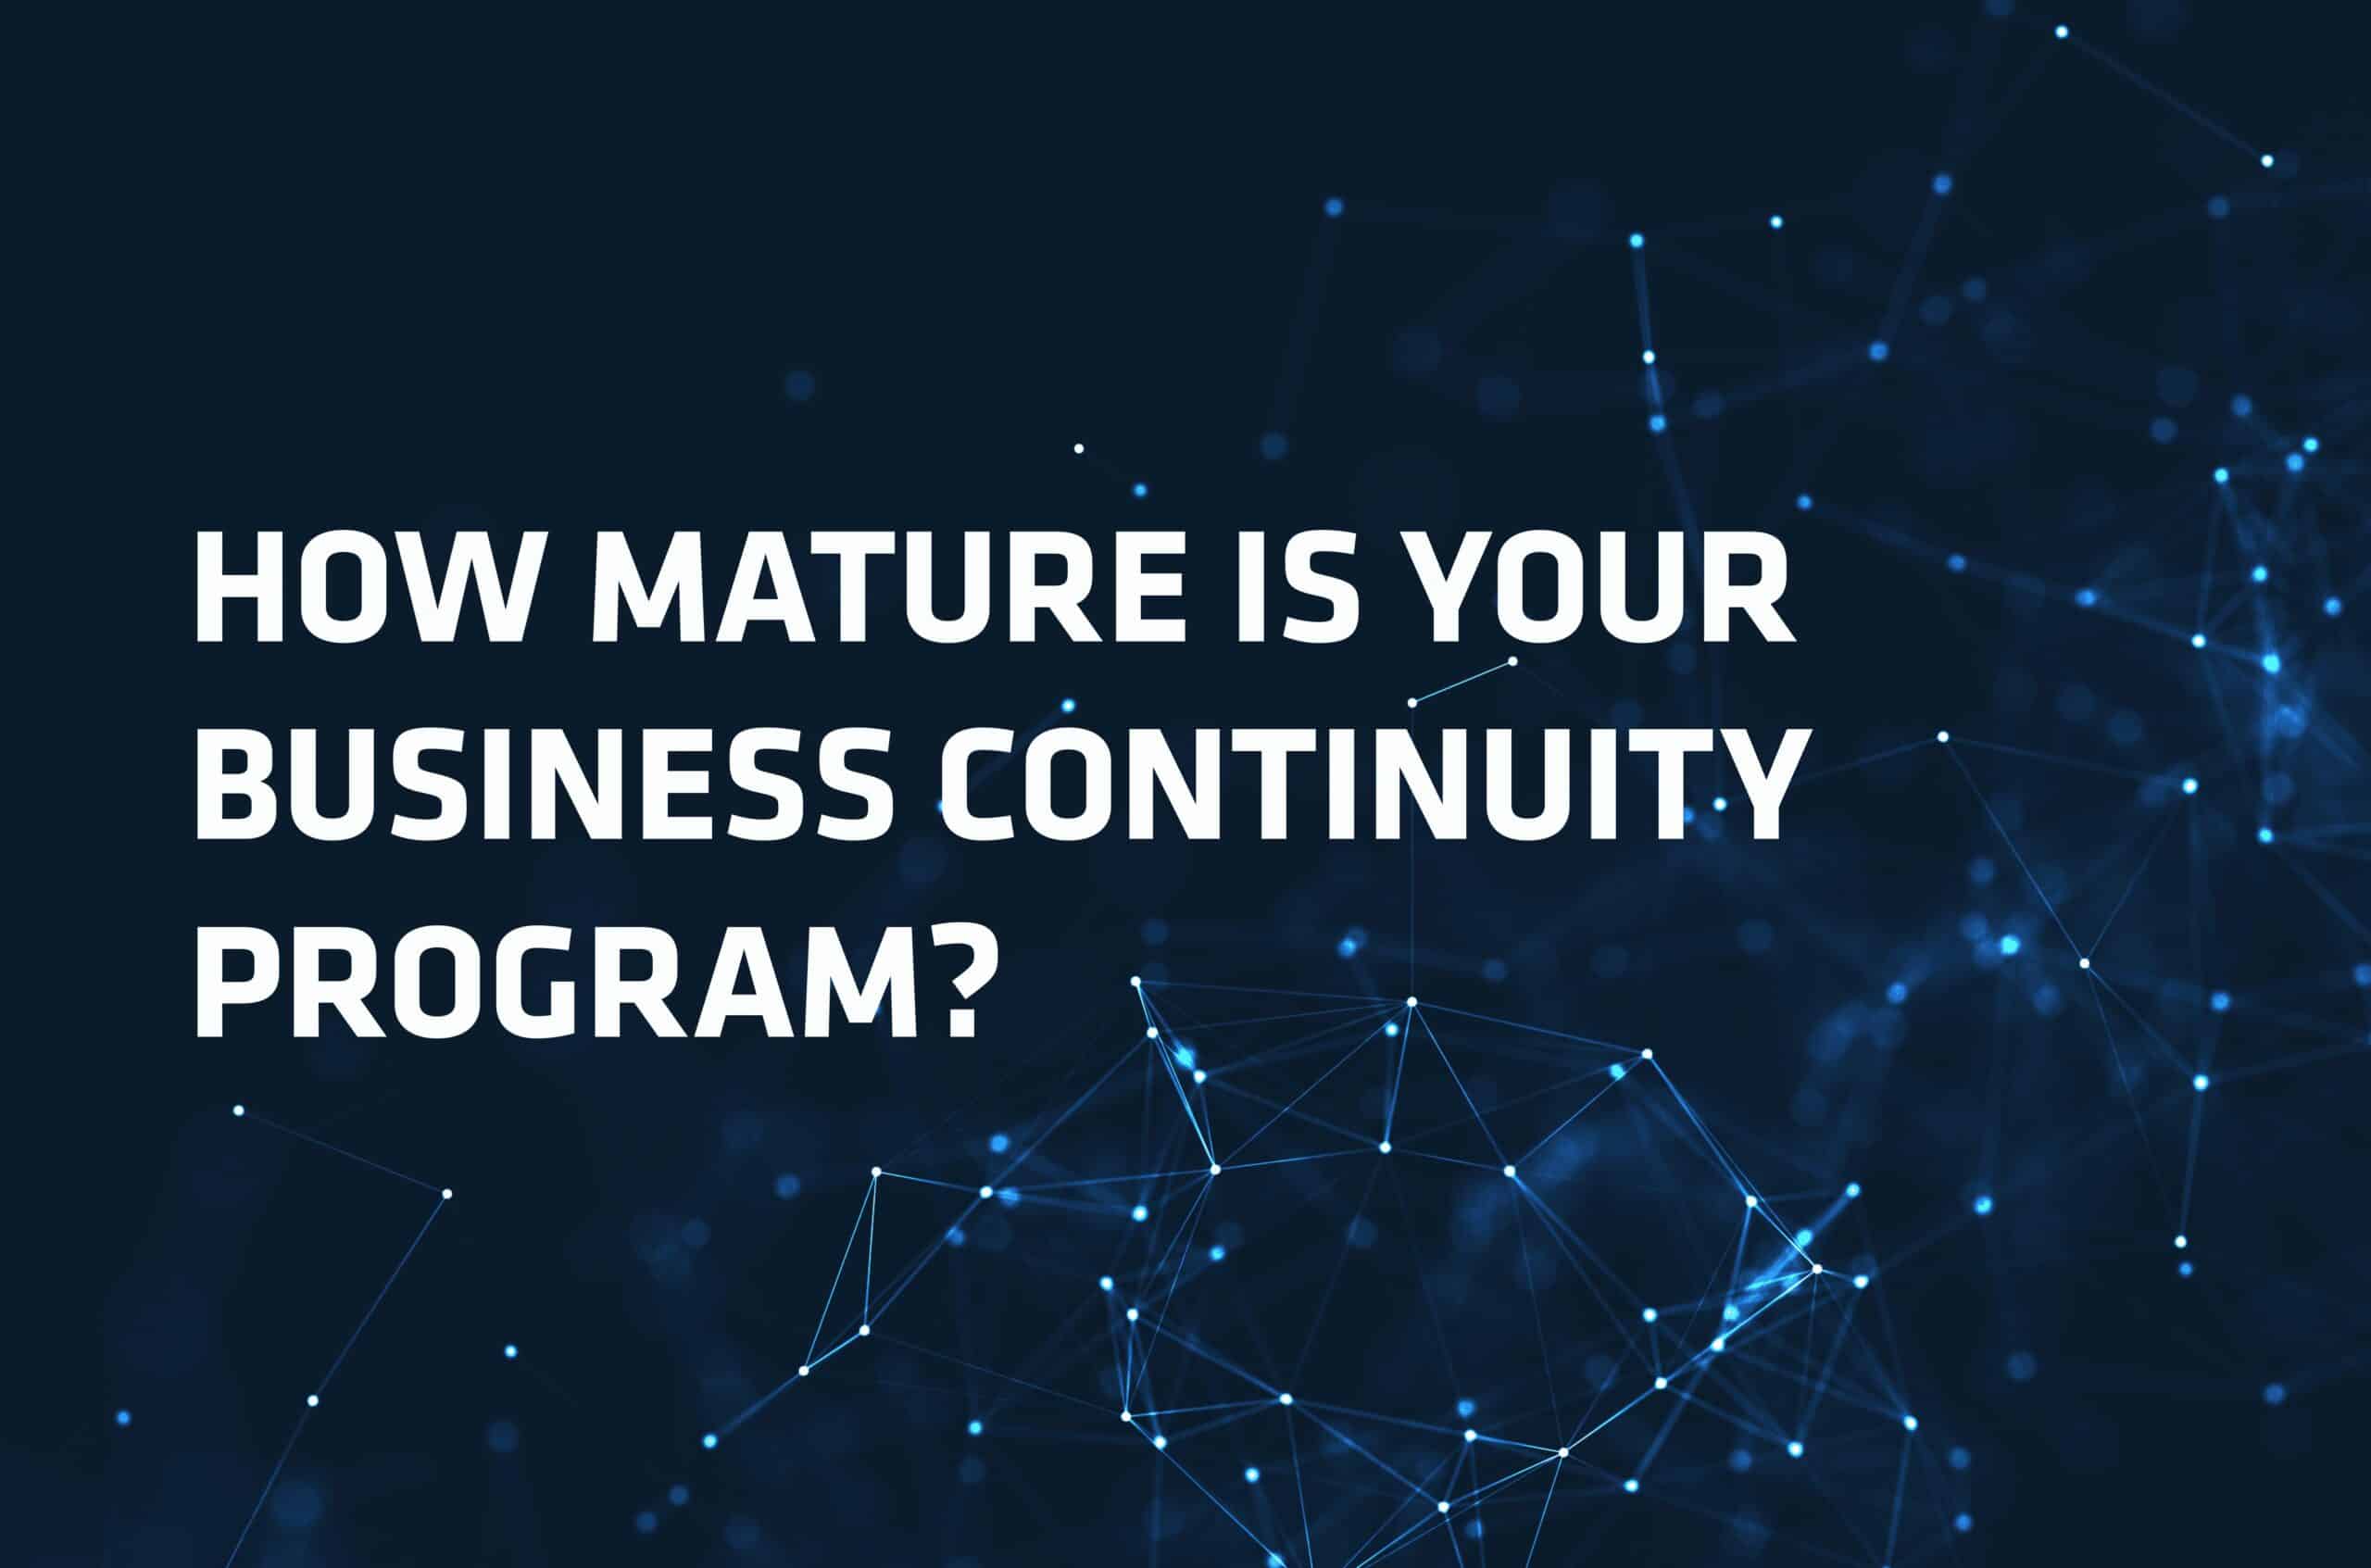 How Mature is your Business Continuity Program?